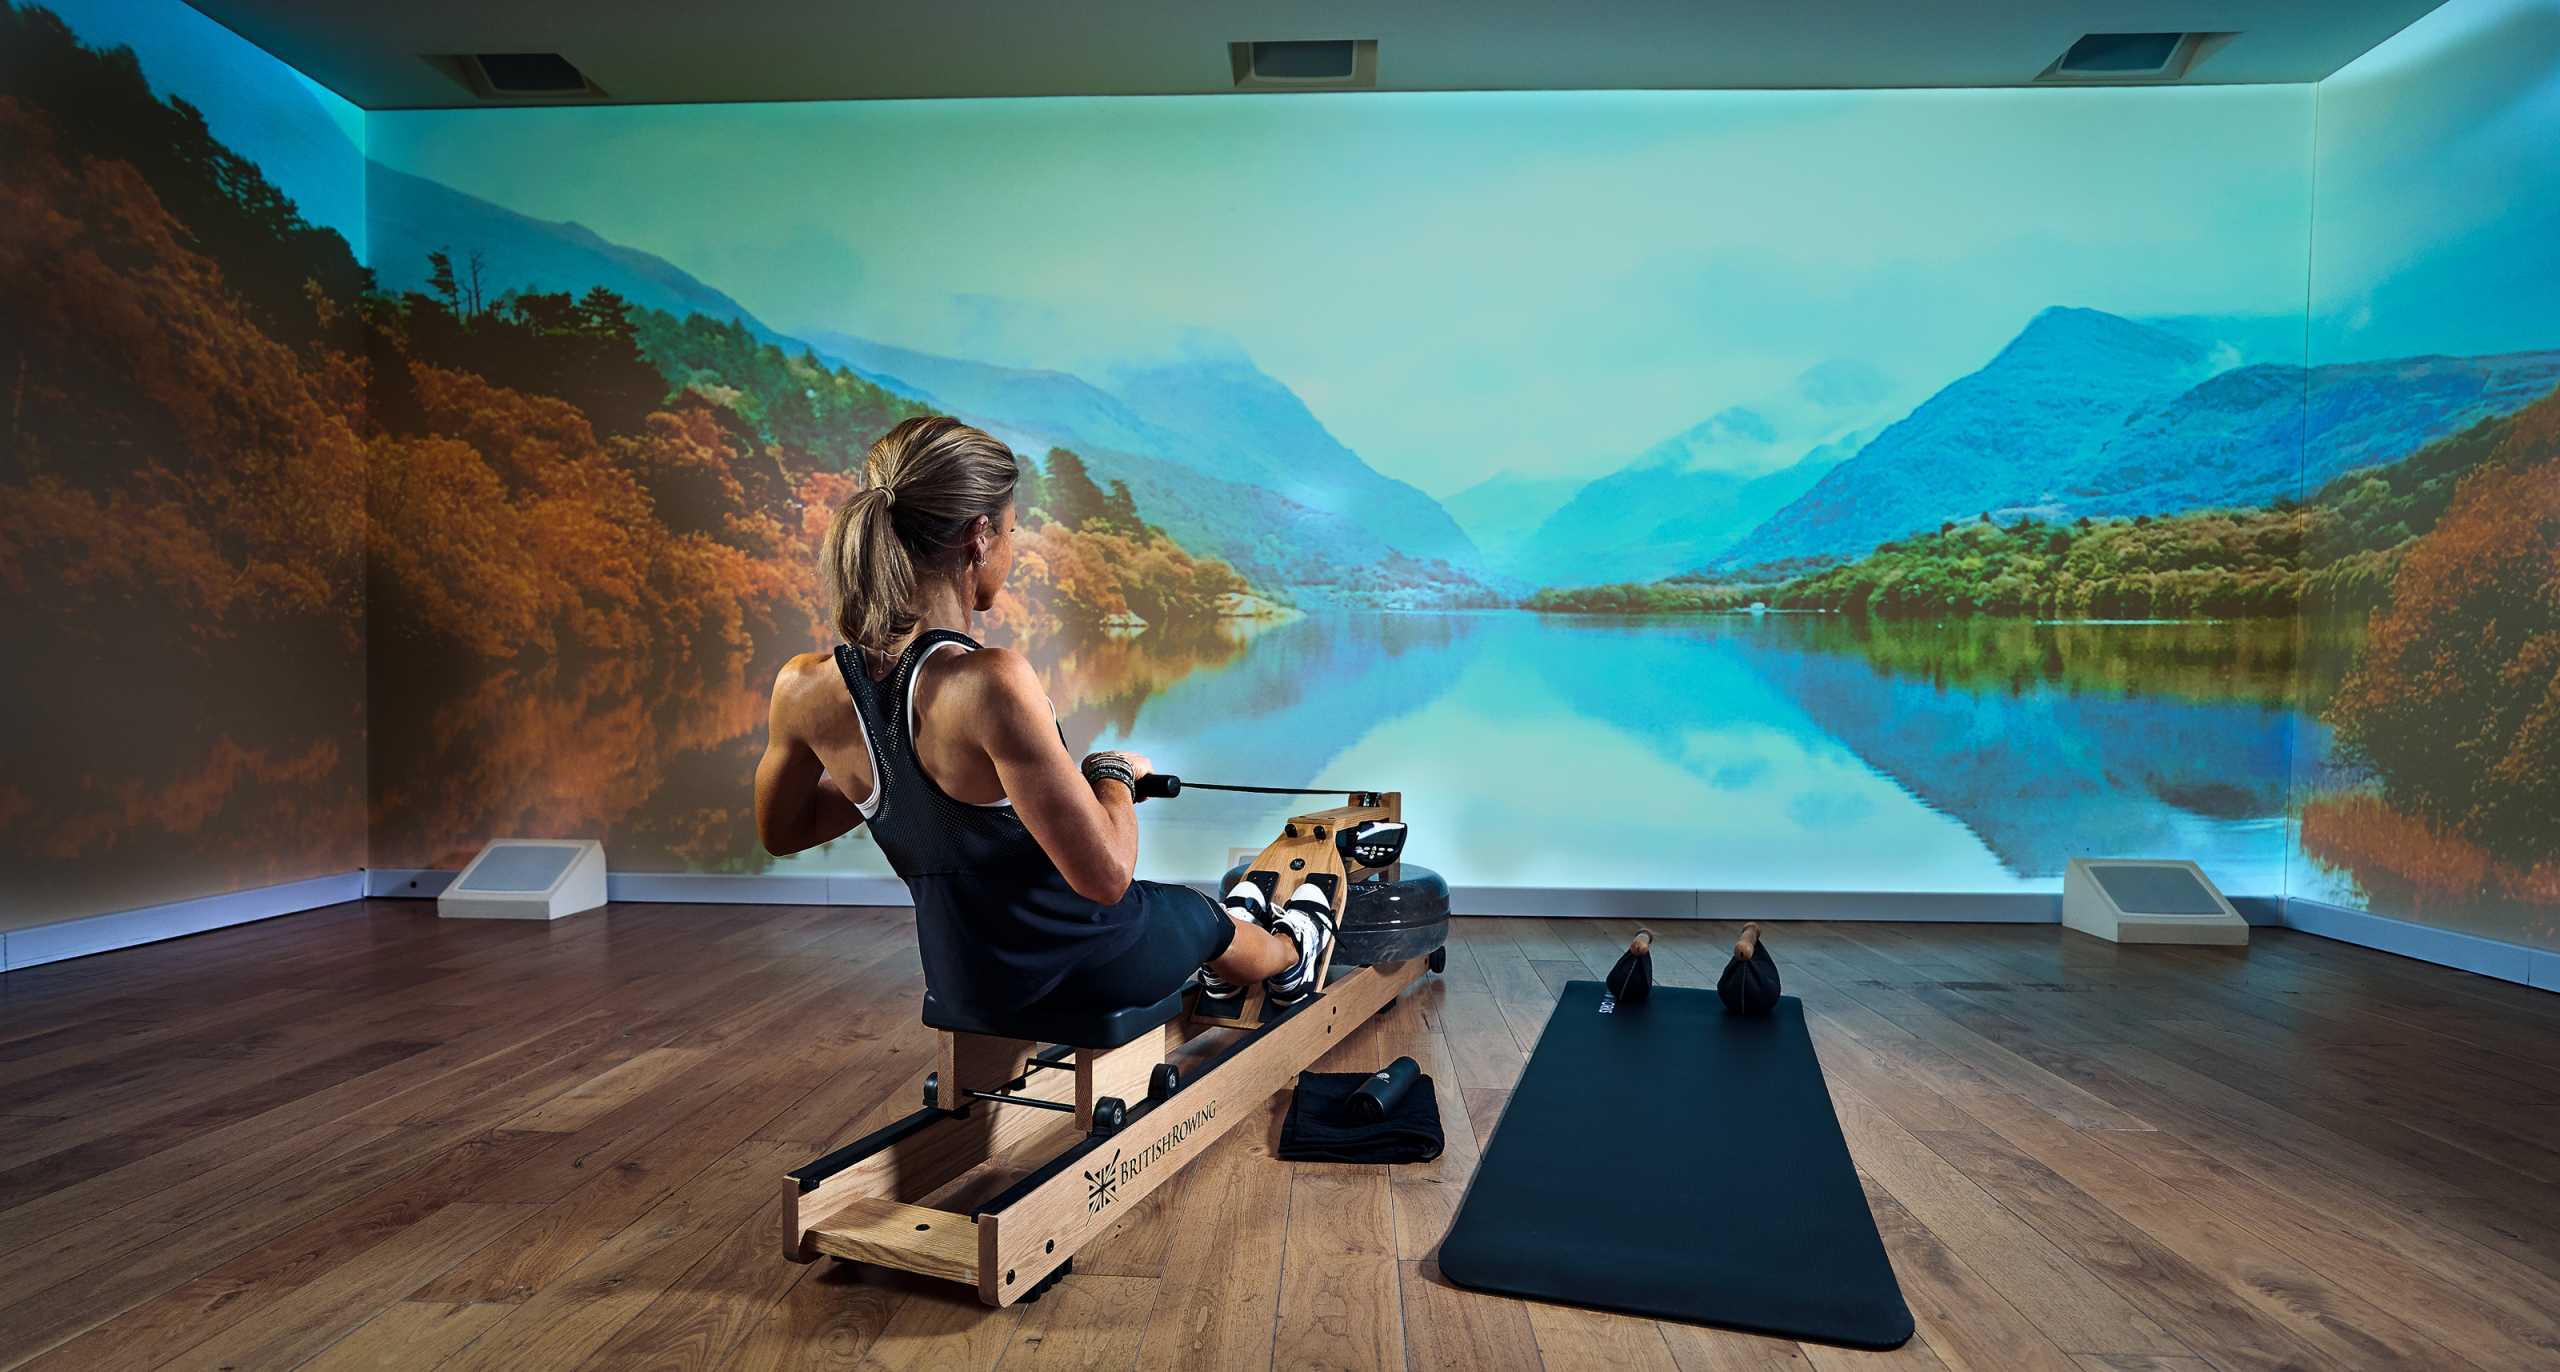 Immersive Gym is also an incredibly flexible solution from a content perspective. The system can be integrated with top fitness platforms such as Asana Rebel, Zwift, and Peloton, but the Immersive Gym team also creates custom content for clients.